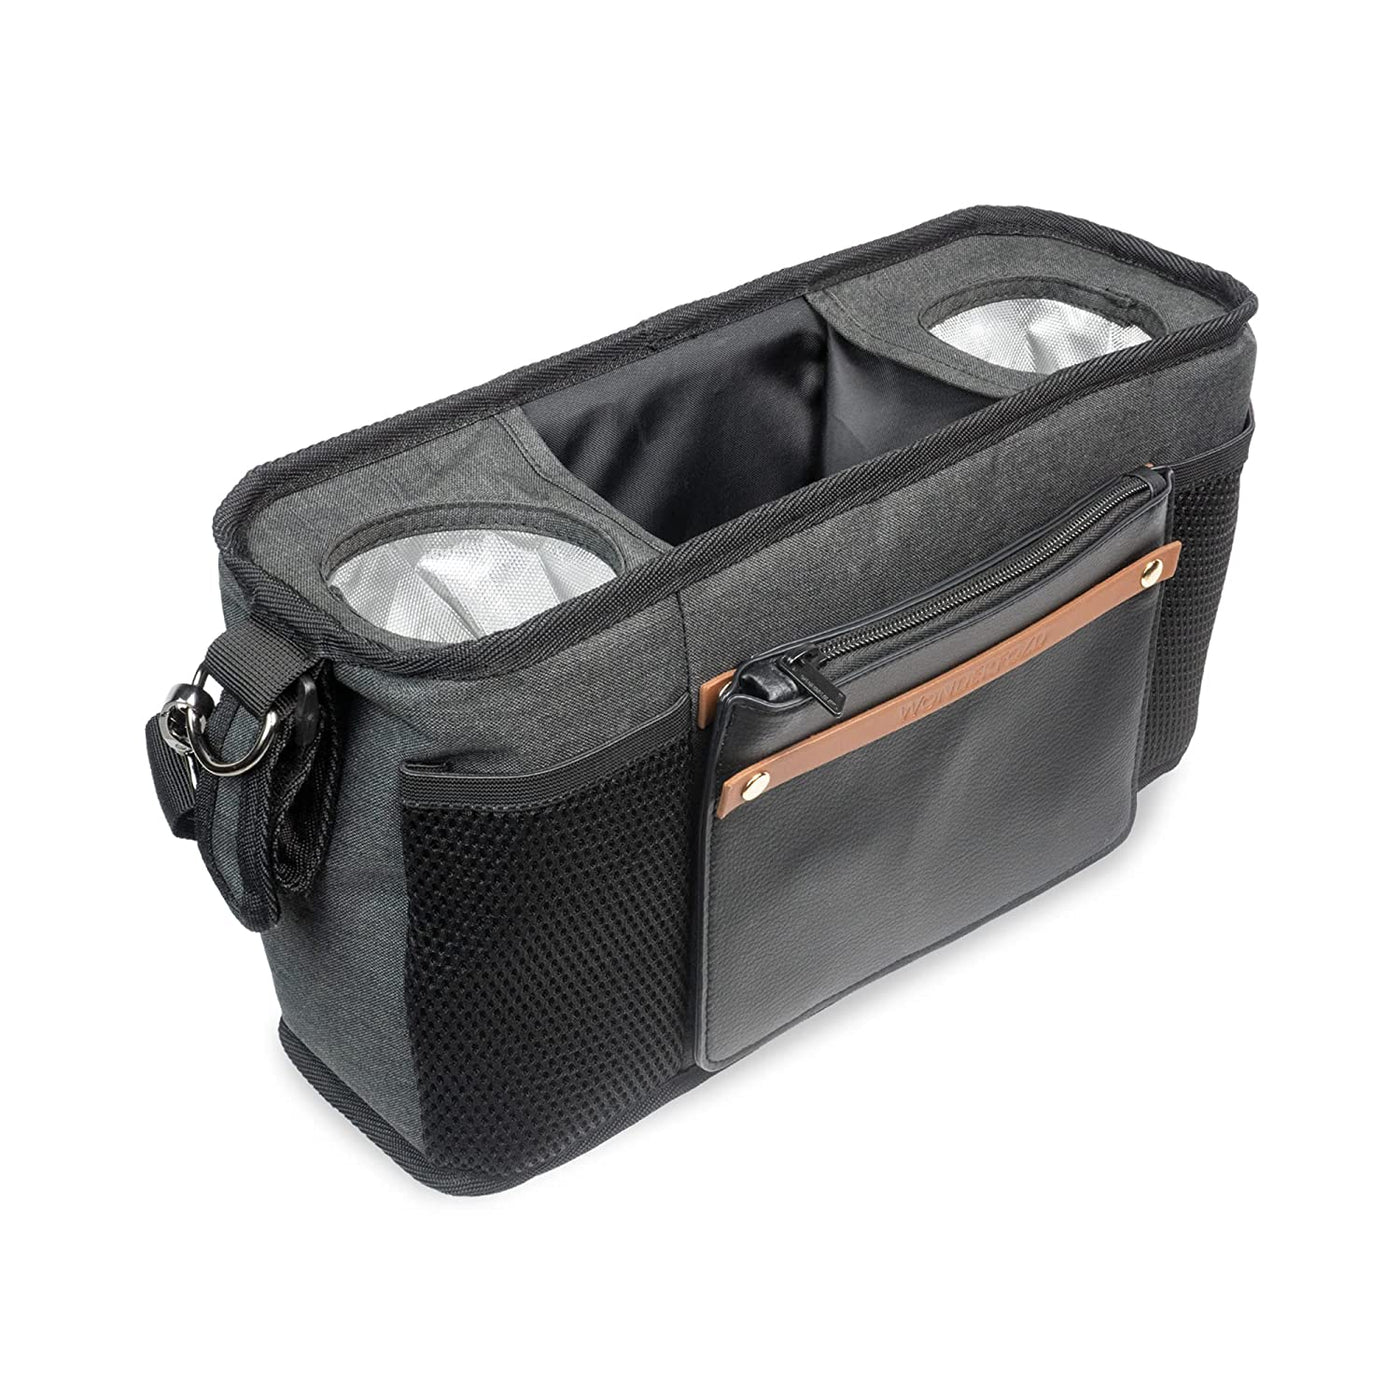 Parent Console with 2 Insulated Cup Holders